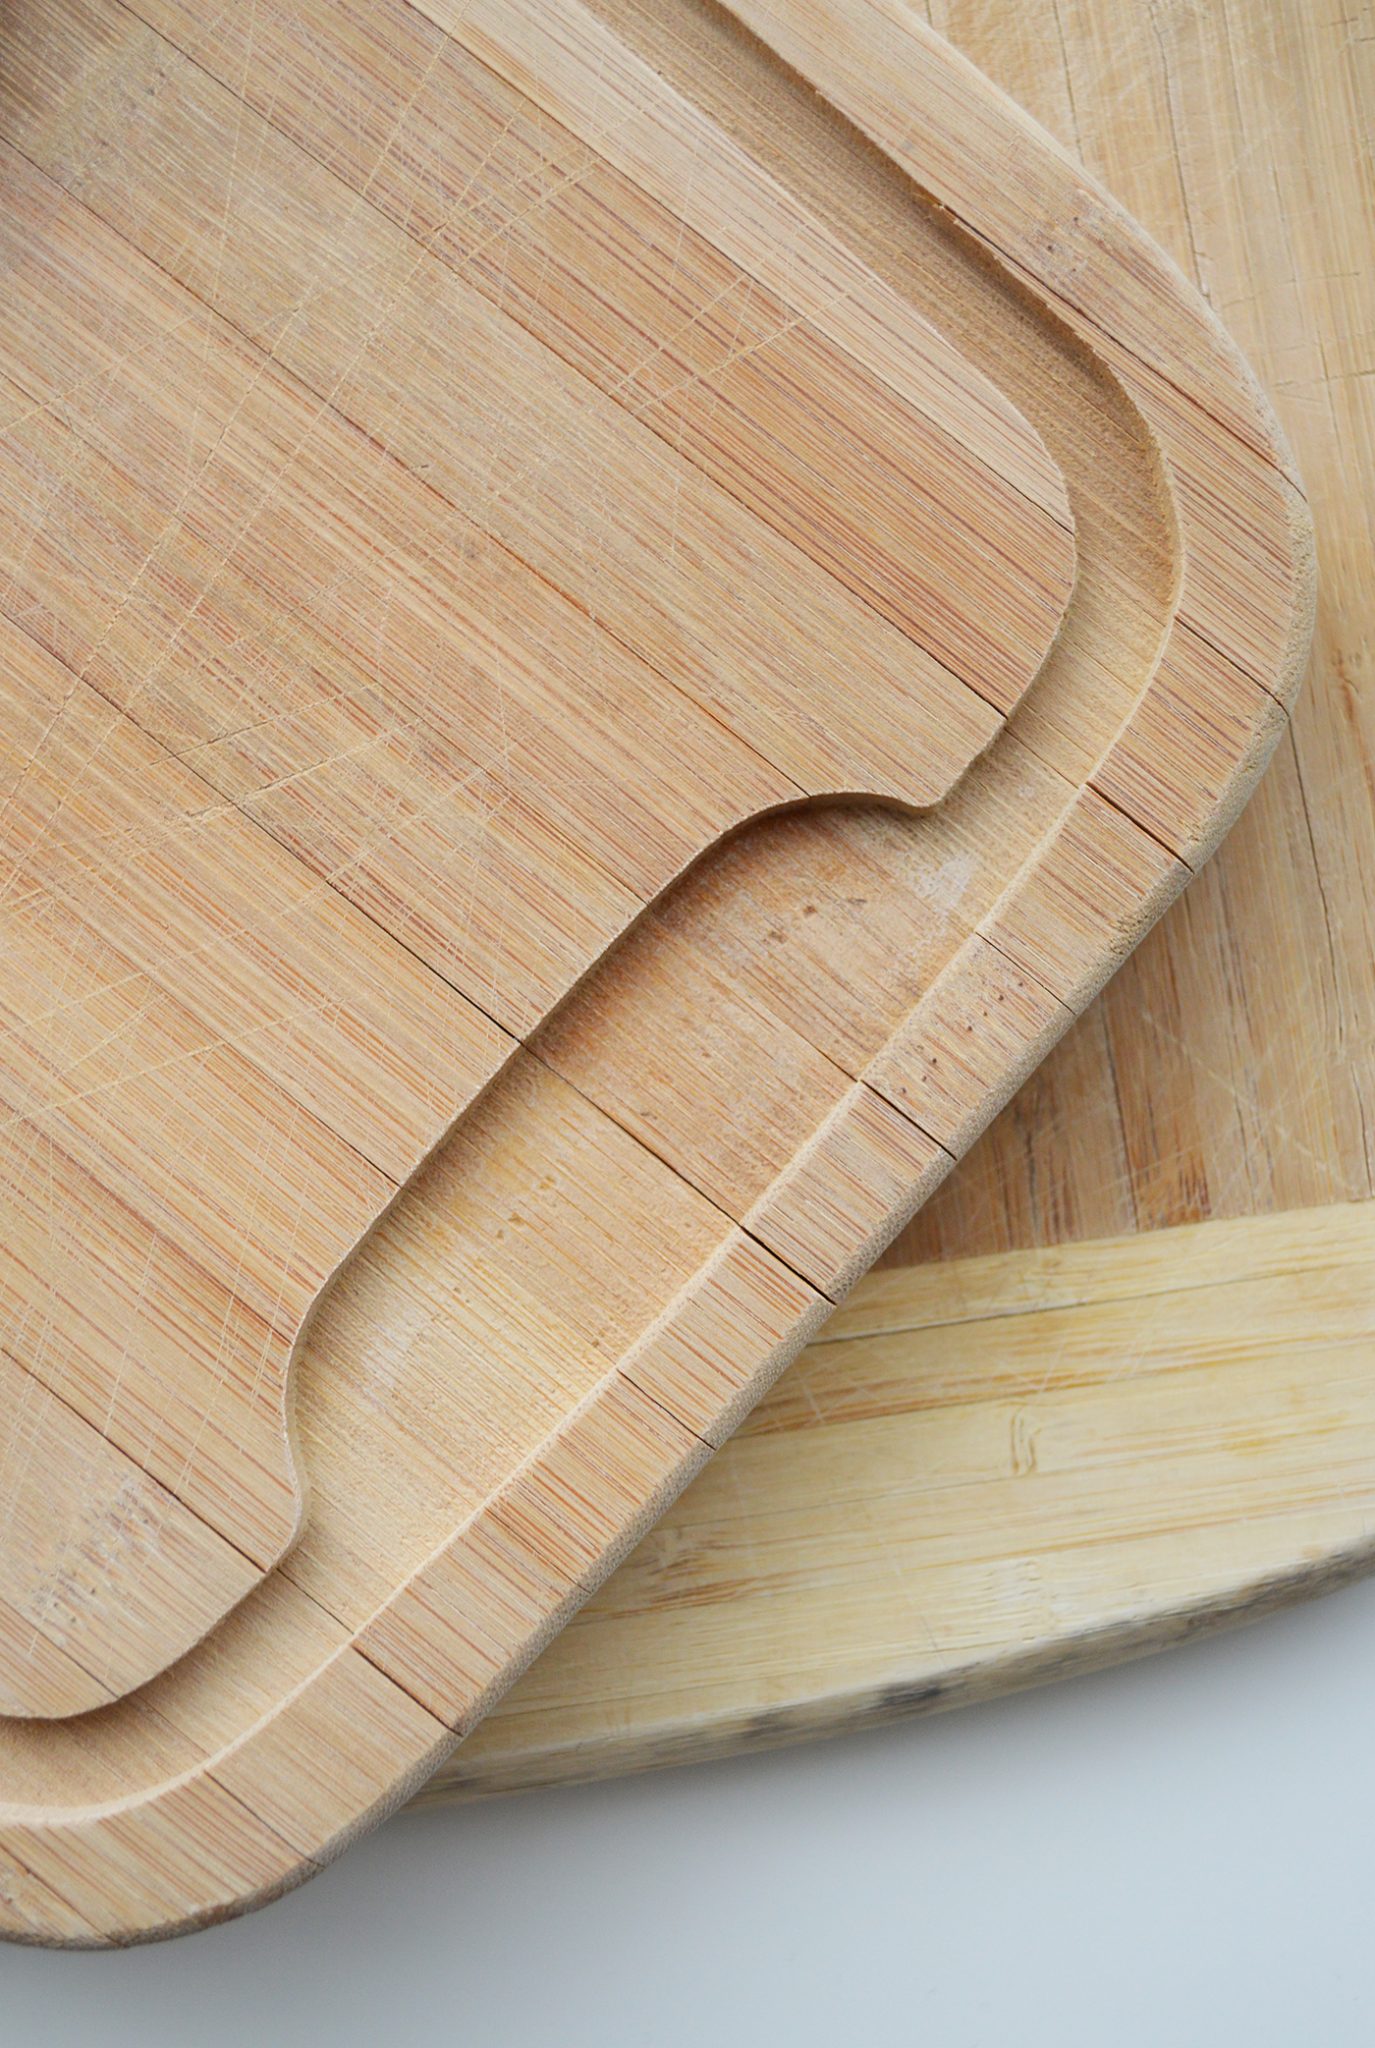 How to Restore a Wood Cutting Board